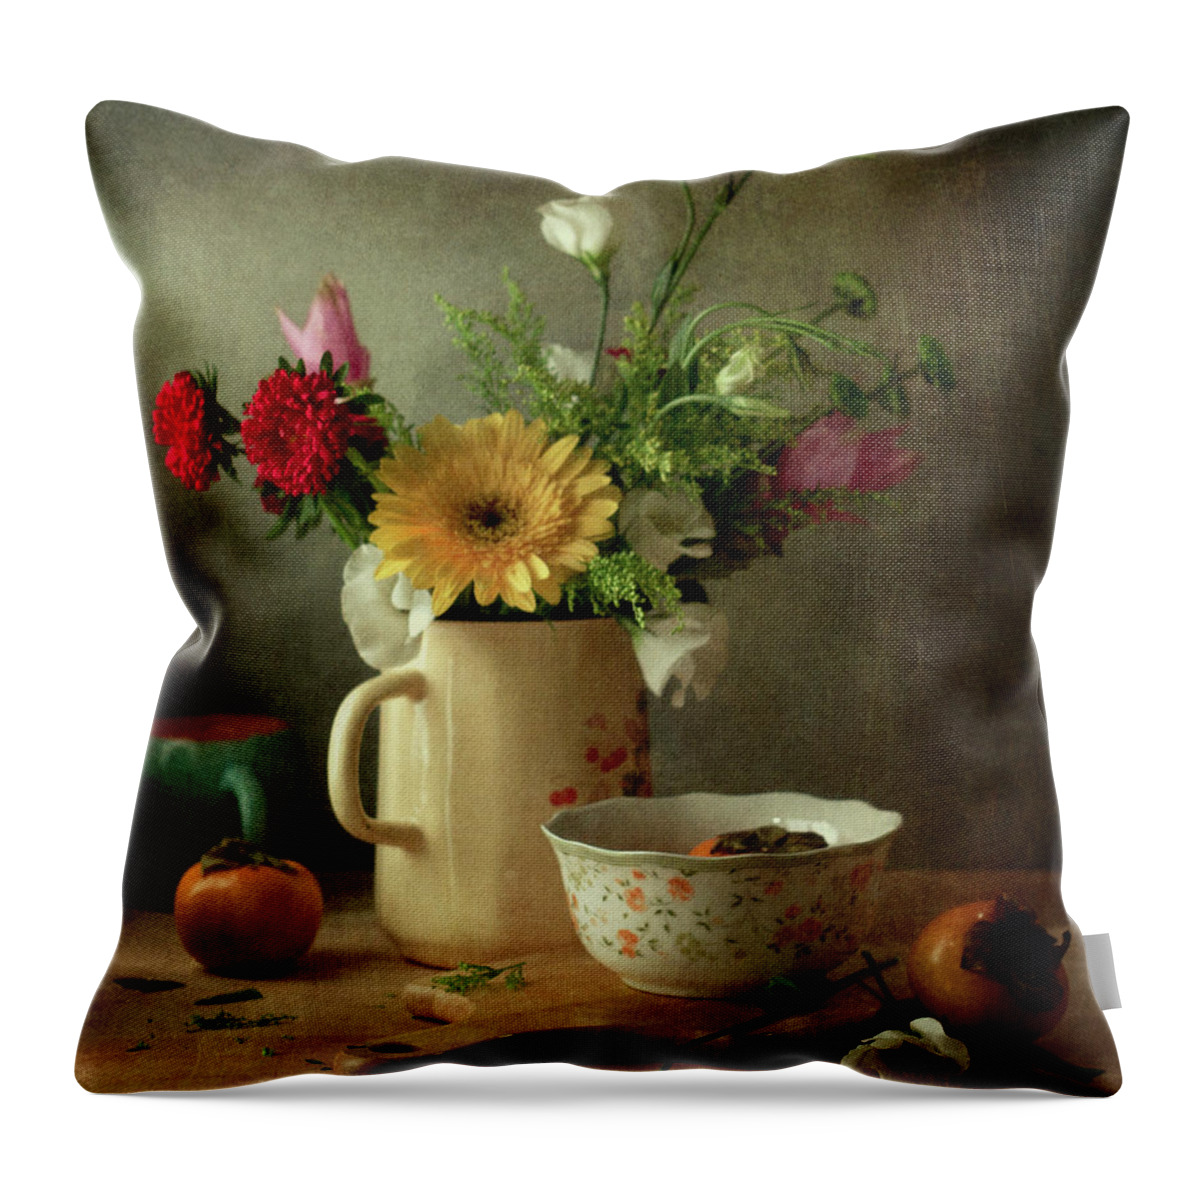 Vase Throw Pillow featuring the photograph Beautiful Flower Bouquet And Fruits by Copyright Anna Nemoy(xaomena)